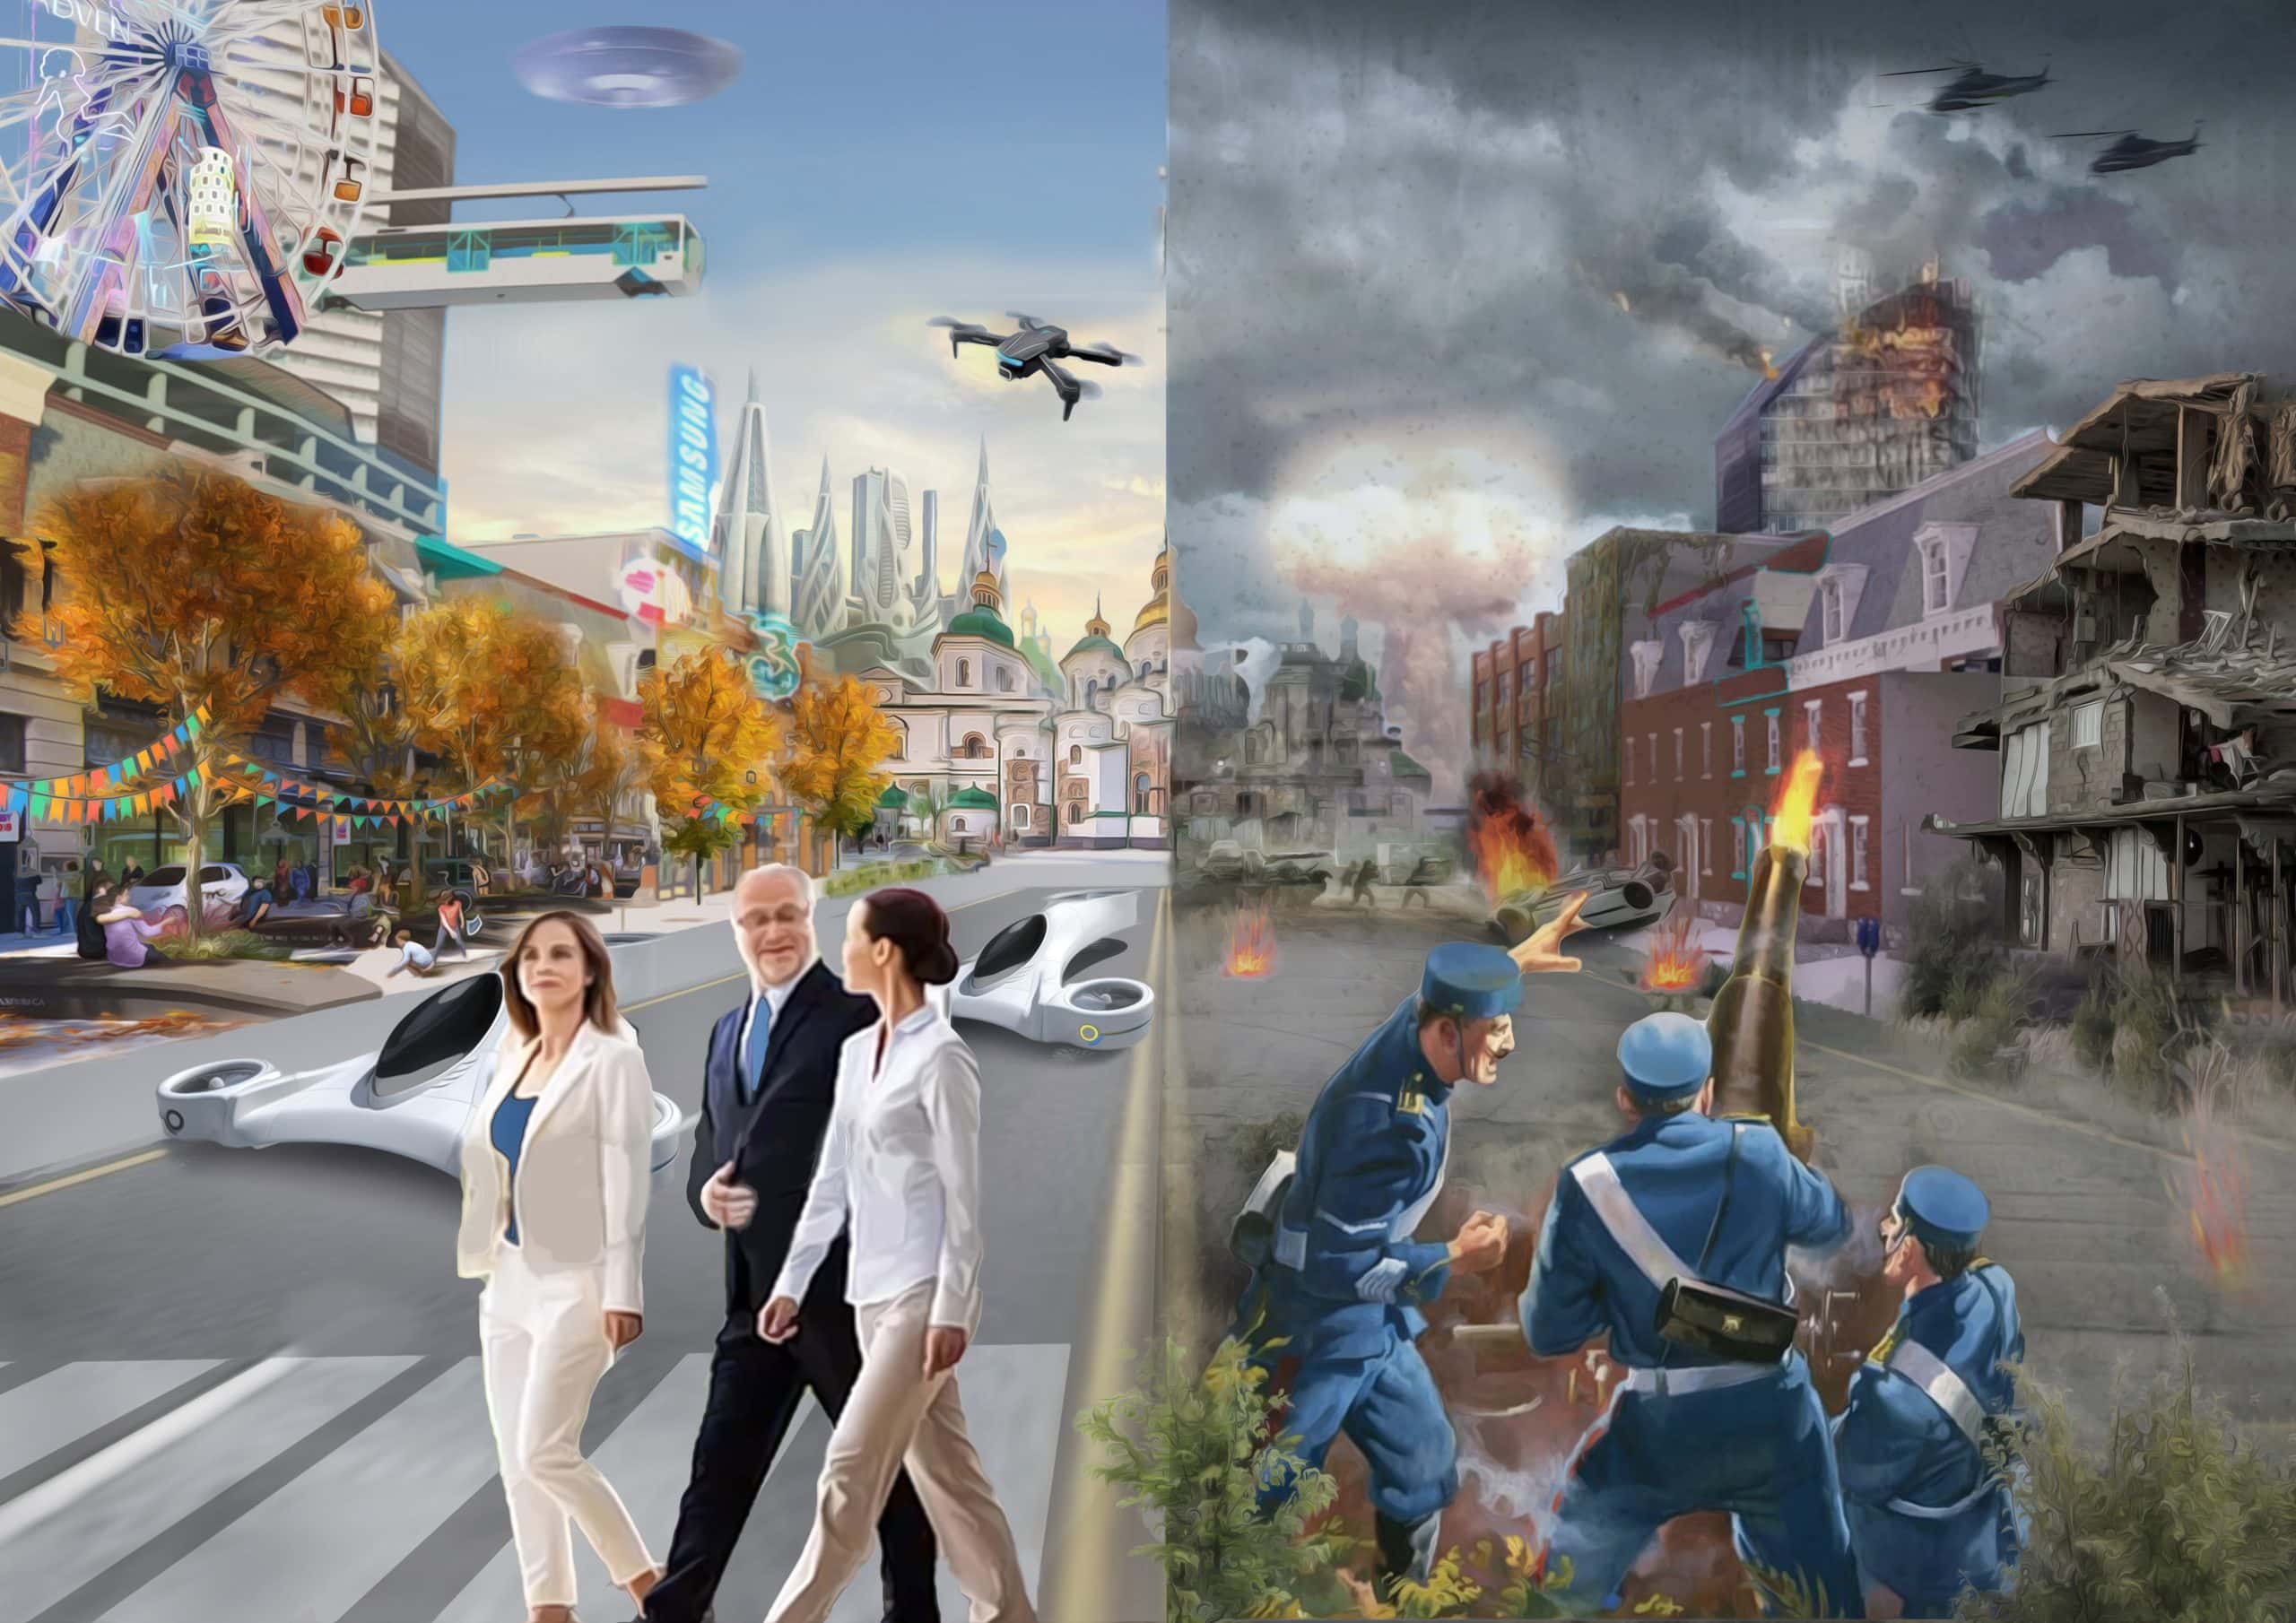 33572_Utopia to the future and Dystopia back to the past_Image